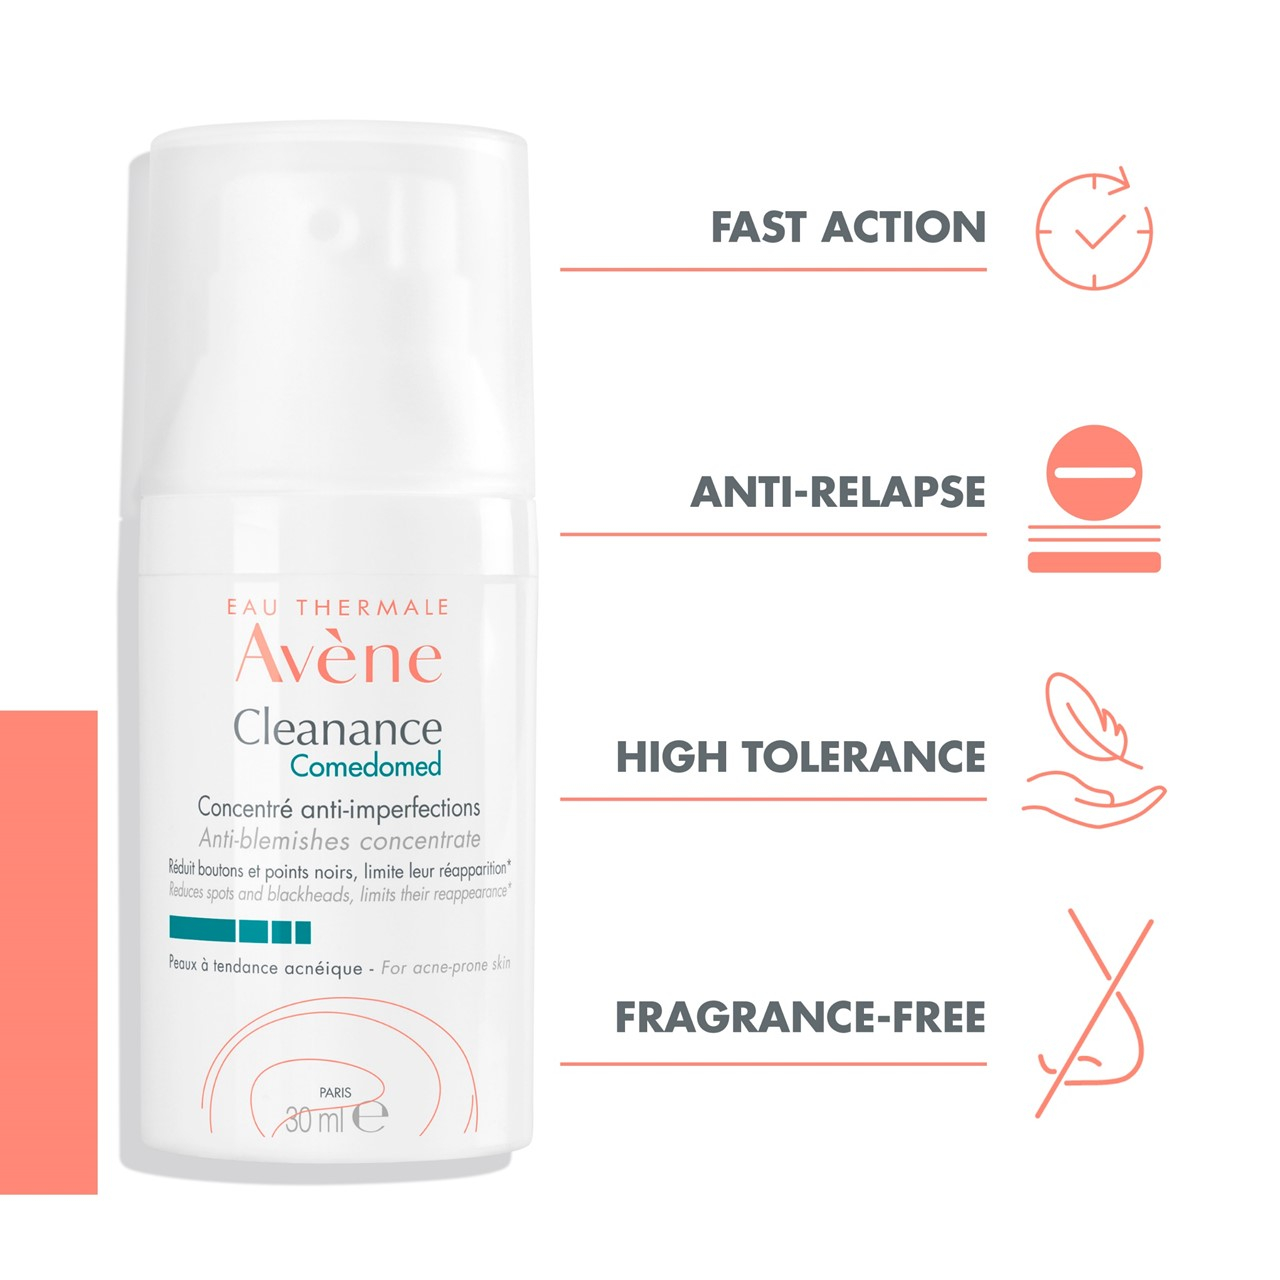 Buy Avène Cleanance Comedomed Anti-Imperfections Concentrate 30ml (1.01fl  oz) · USA